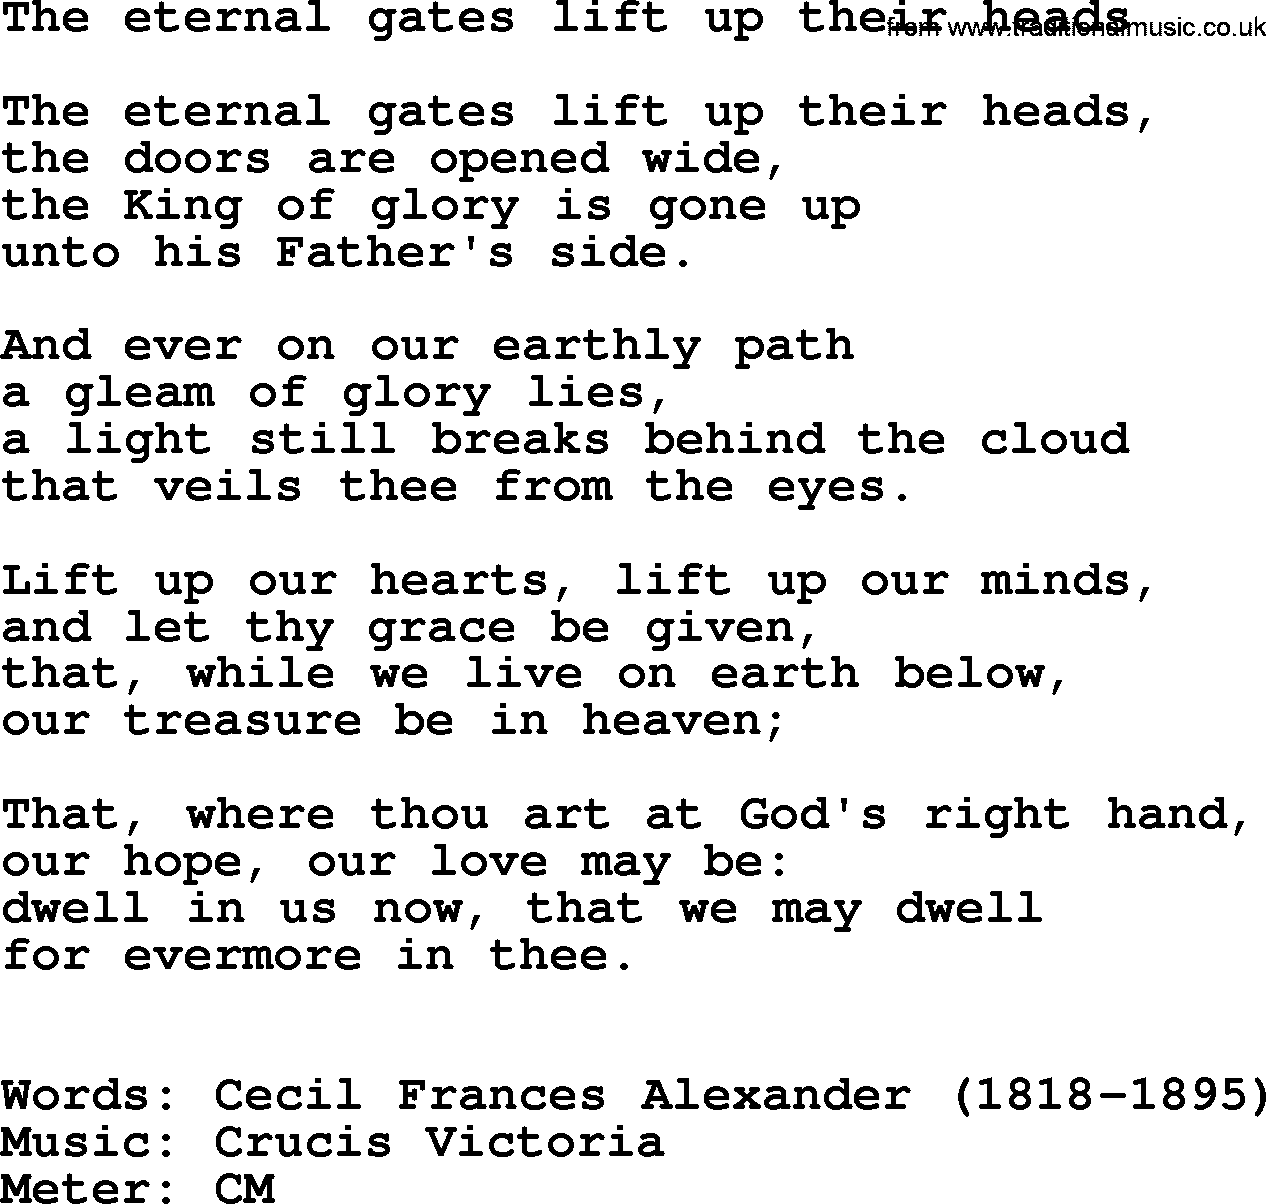 Ascensiontide Hynms collection, Hymn: The Eternal Gates Lift Up Their Heads, lyrics and PDF